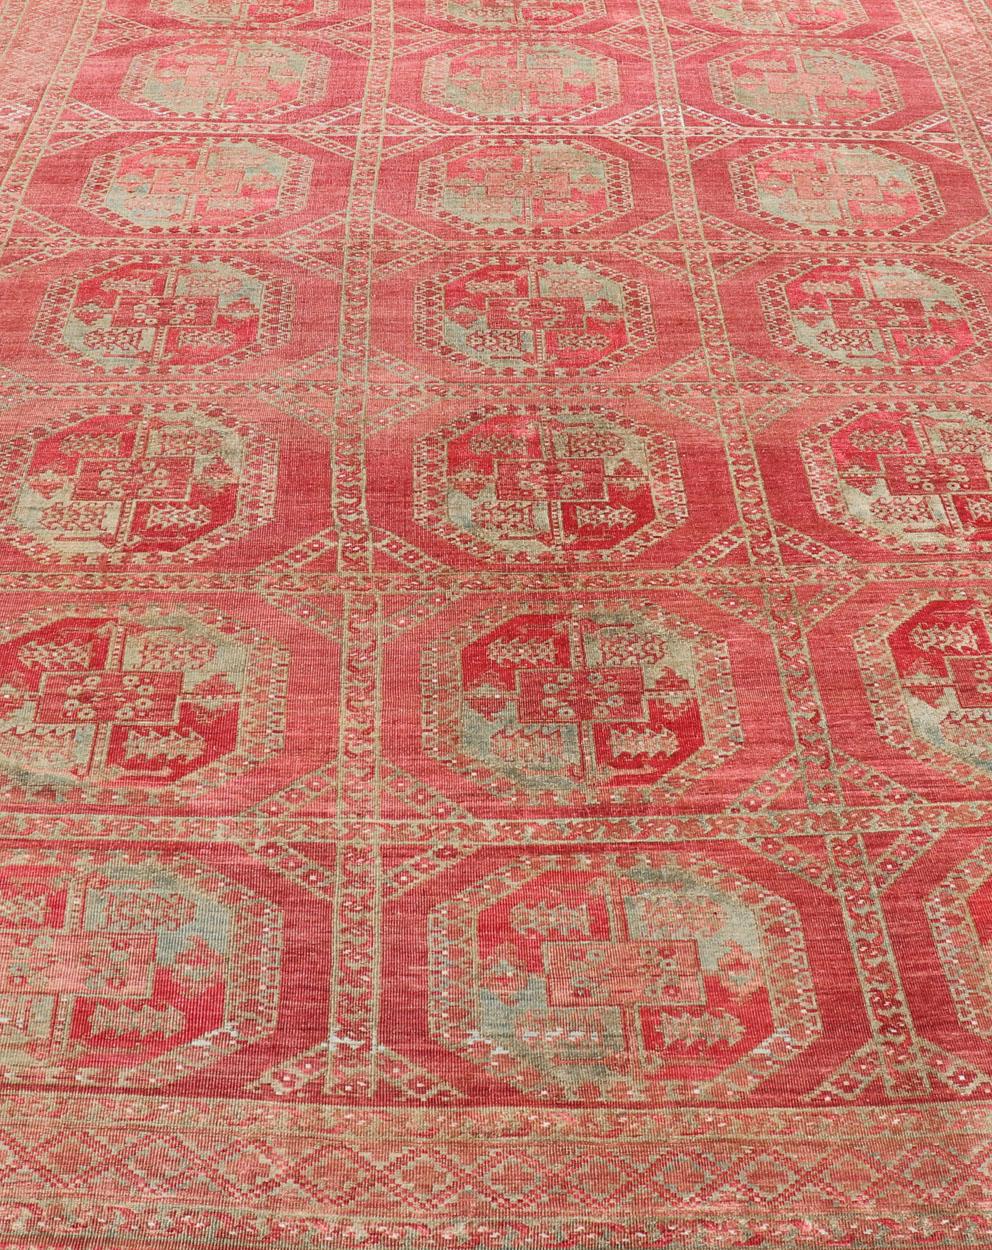 Hand-Knotted Wool Ersari Rug in Wool with Gul Design in Shades of Red & Green 2